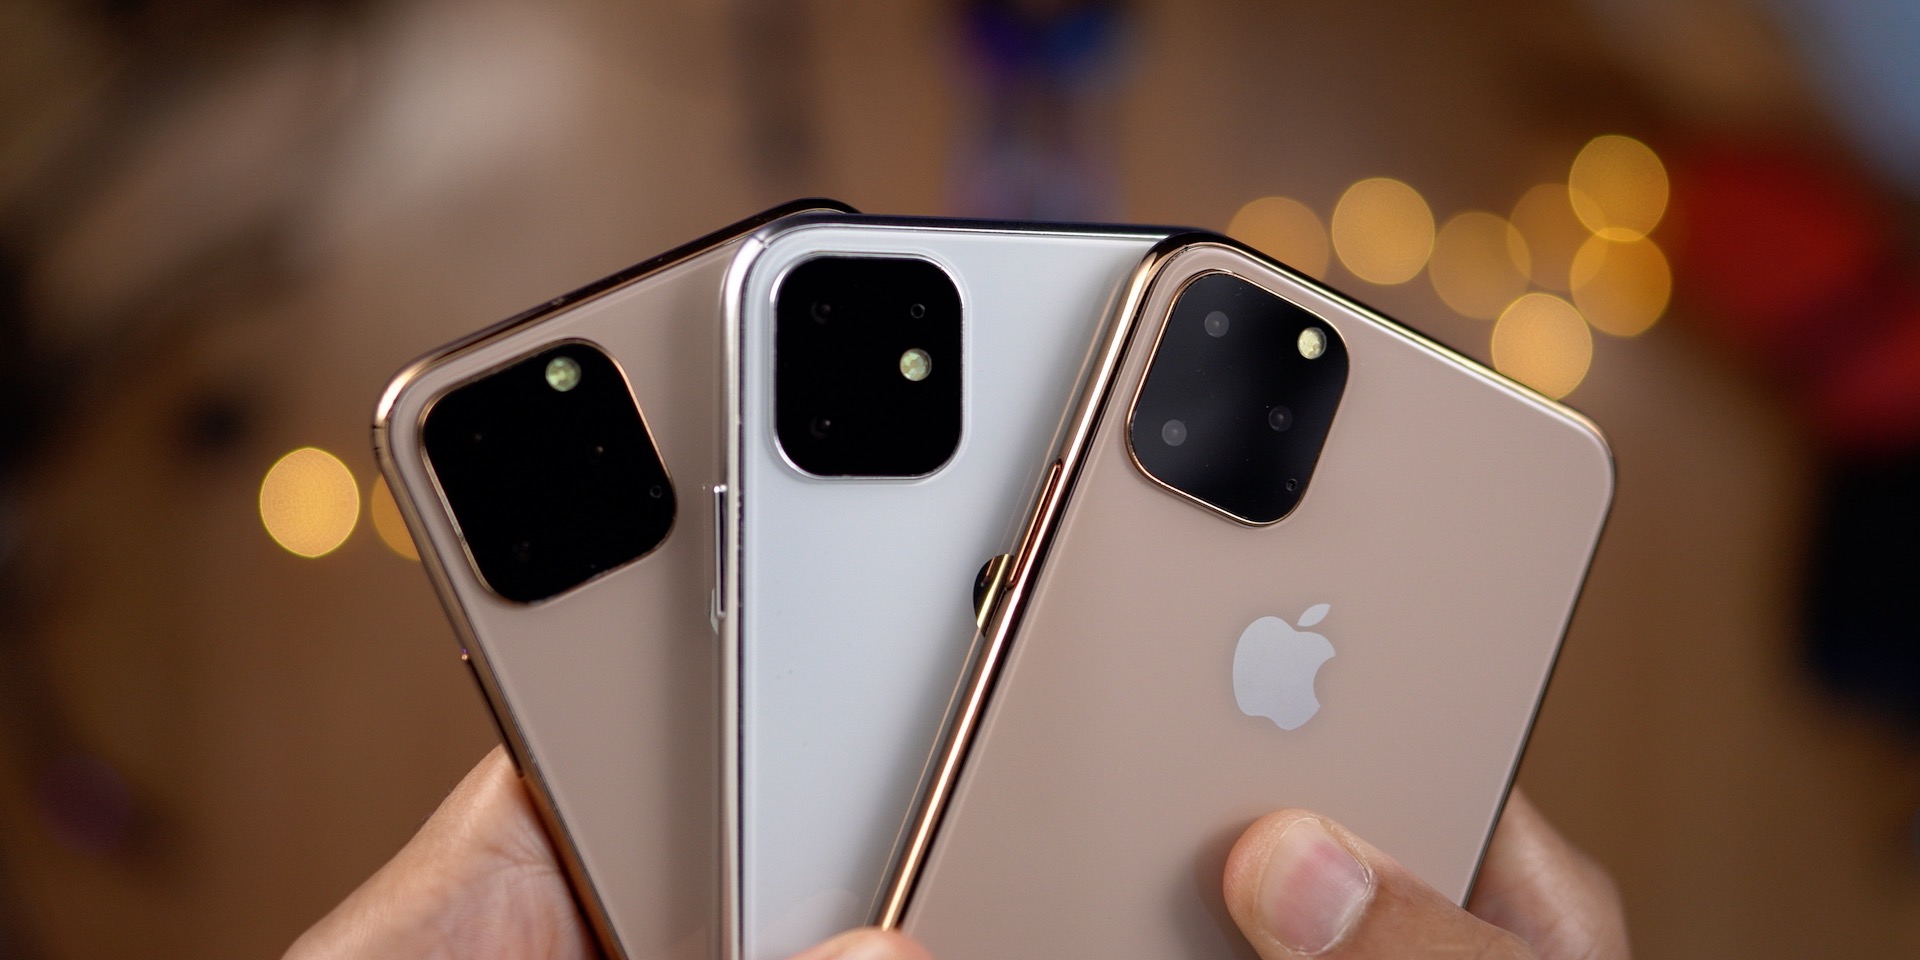 New iPhones May Have Suffix “Pro” in Name